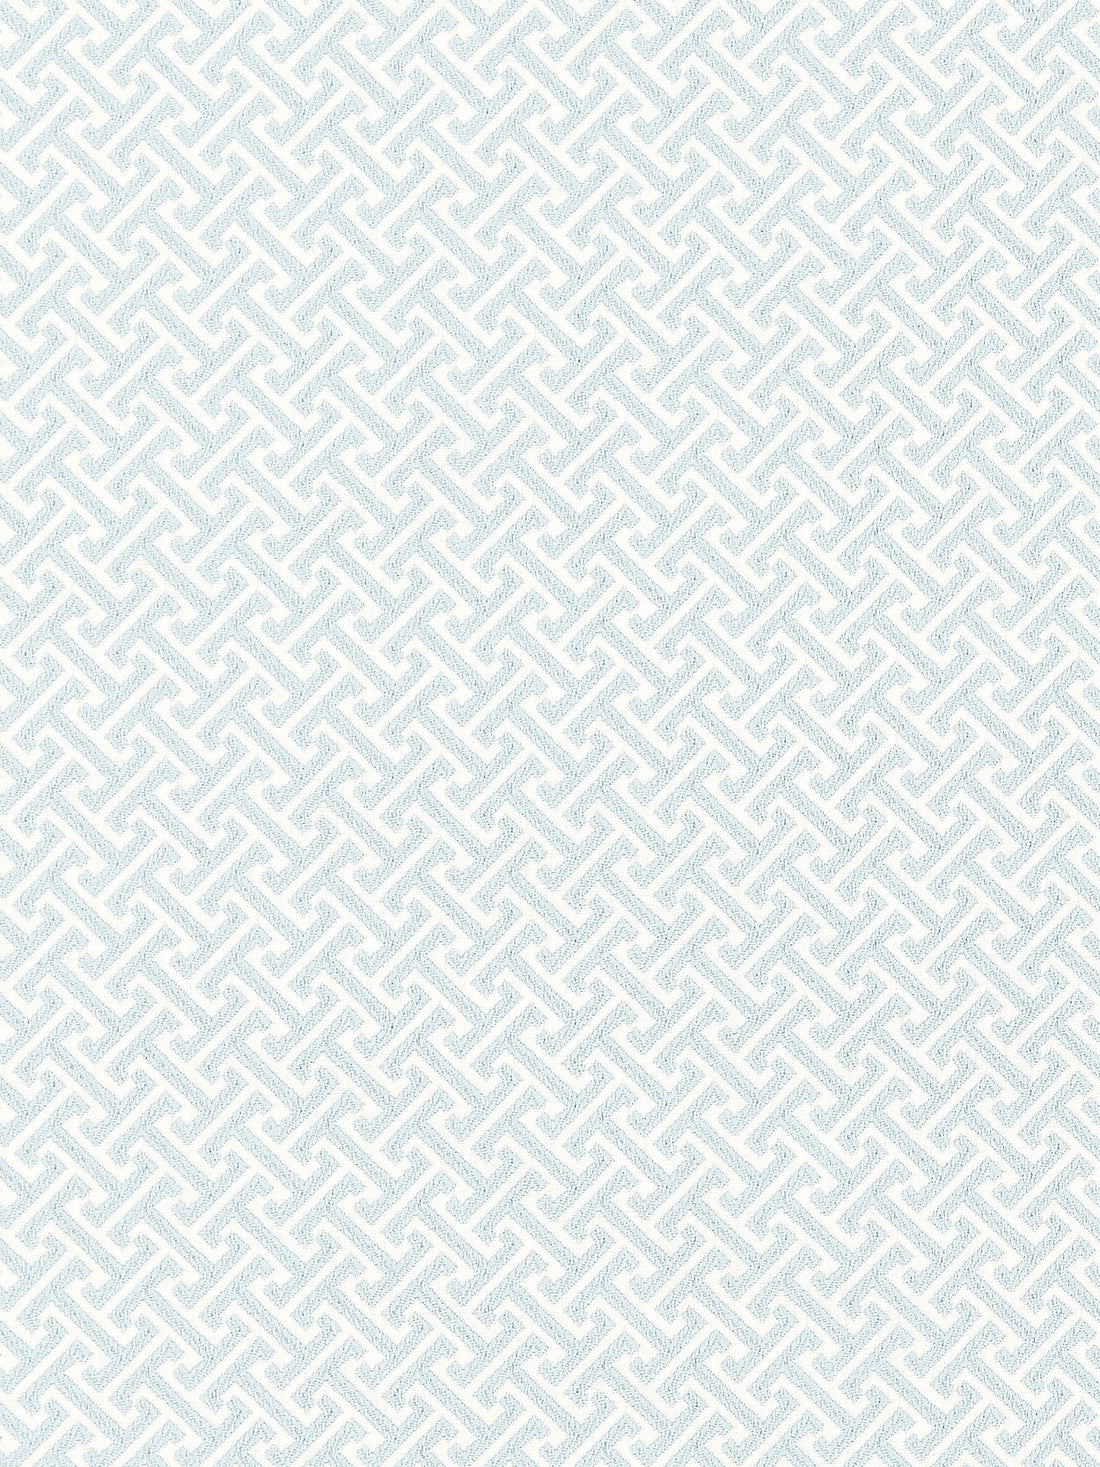 Mandarin Weave fabric in sky color - pattern number SC 000227102 - by Scalamandre in the Scalamandre Fabrics Book 1 collection